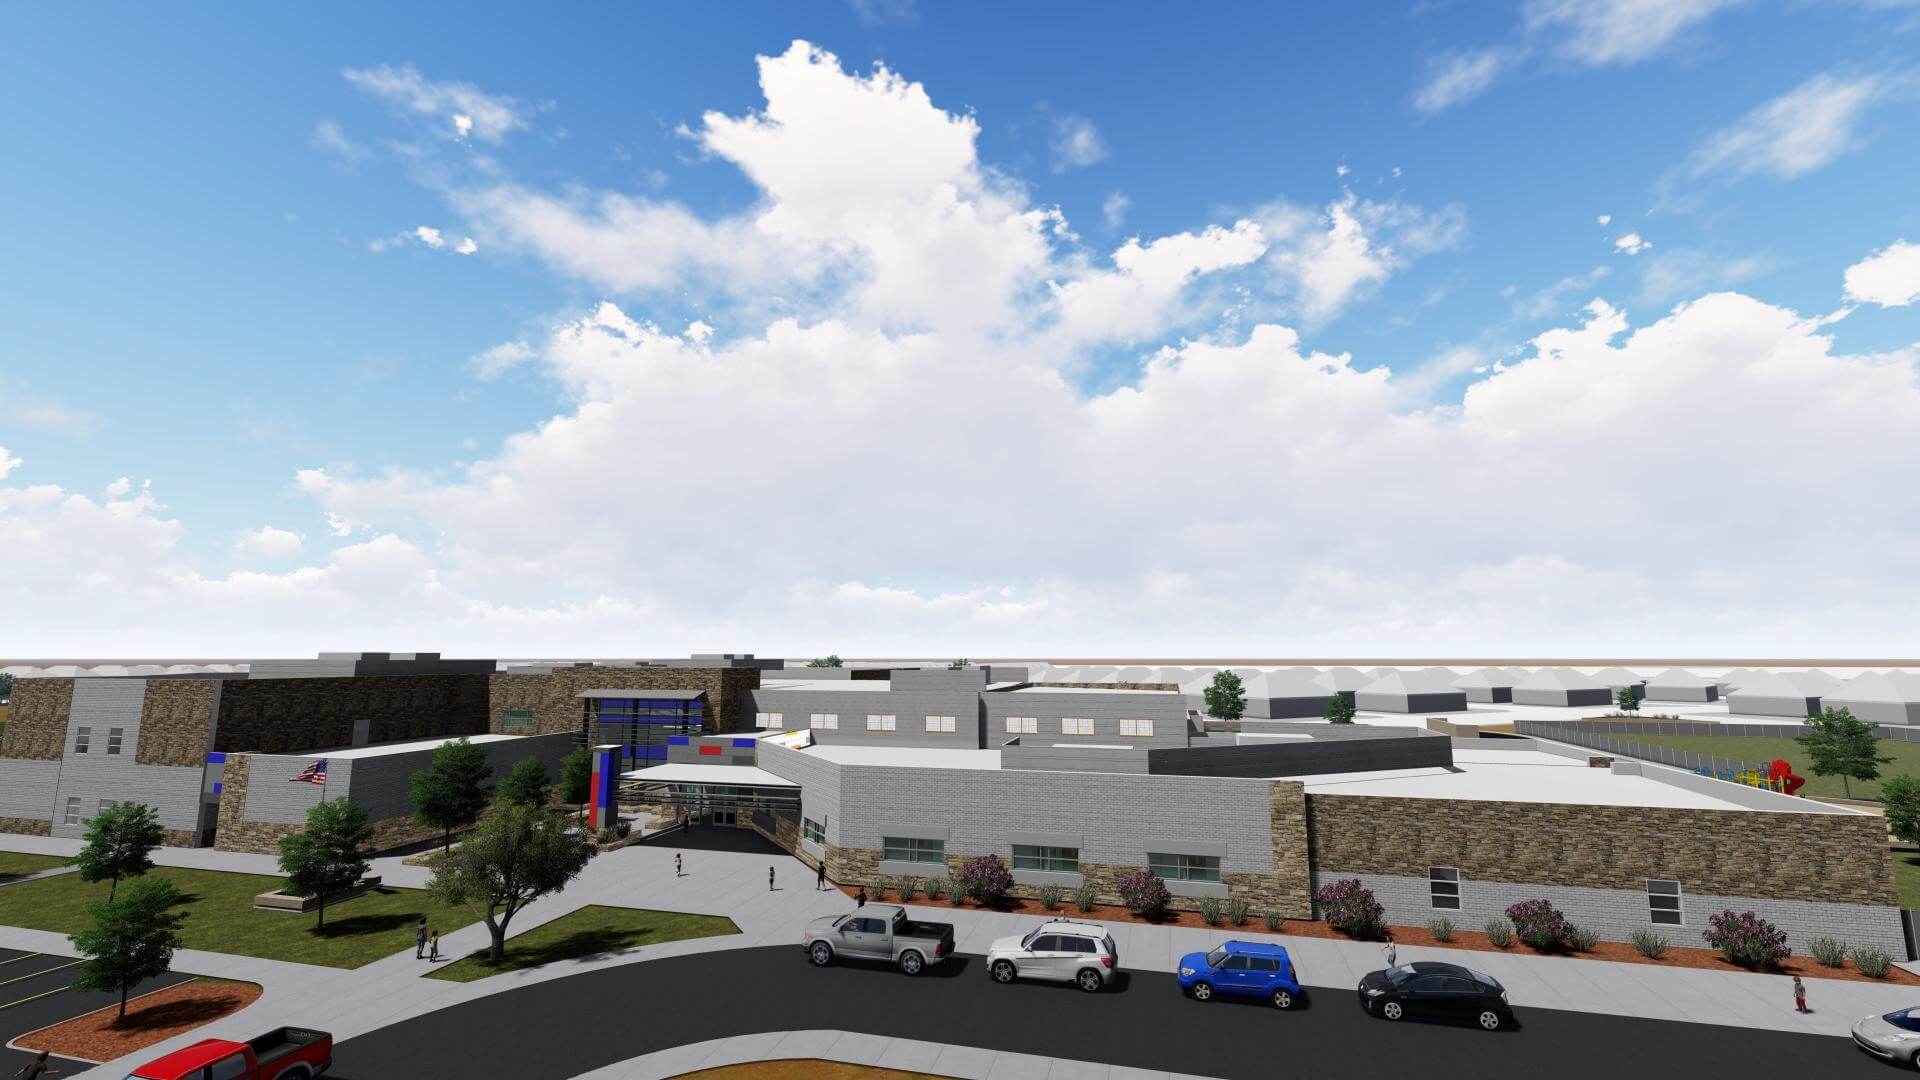 *Concept Rendering of New Elementary School, for visualization purposes only; design is subject to change